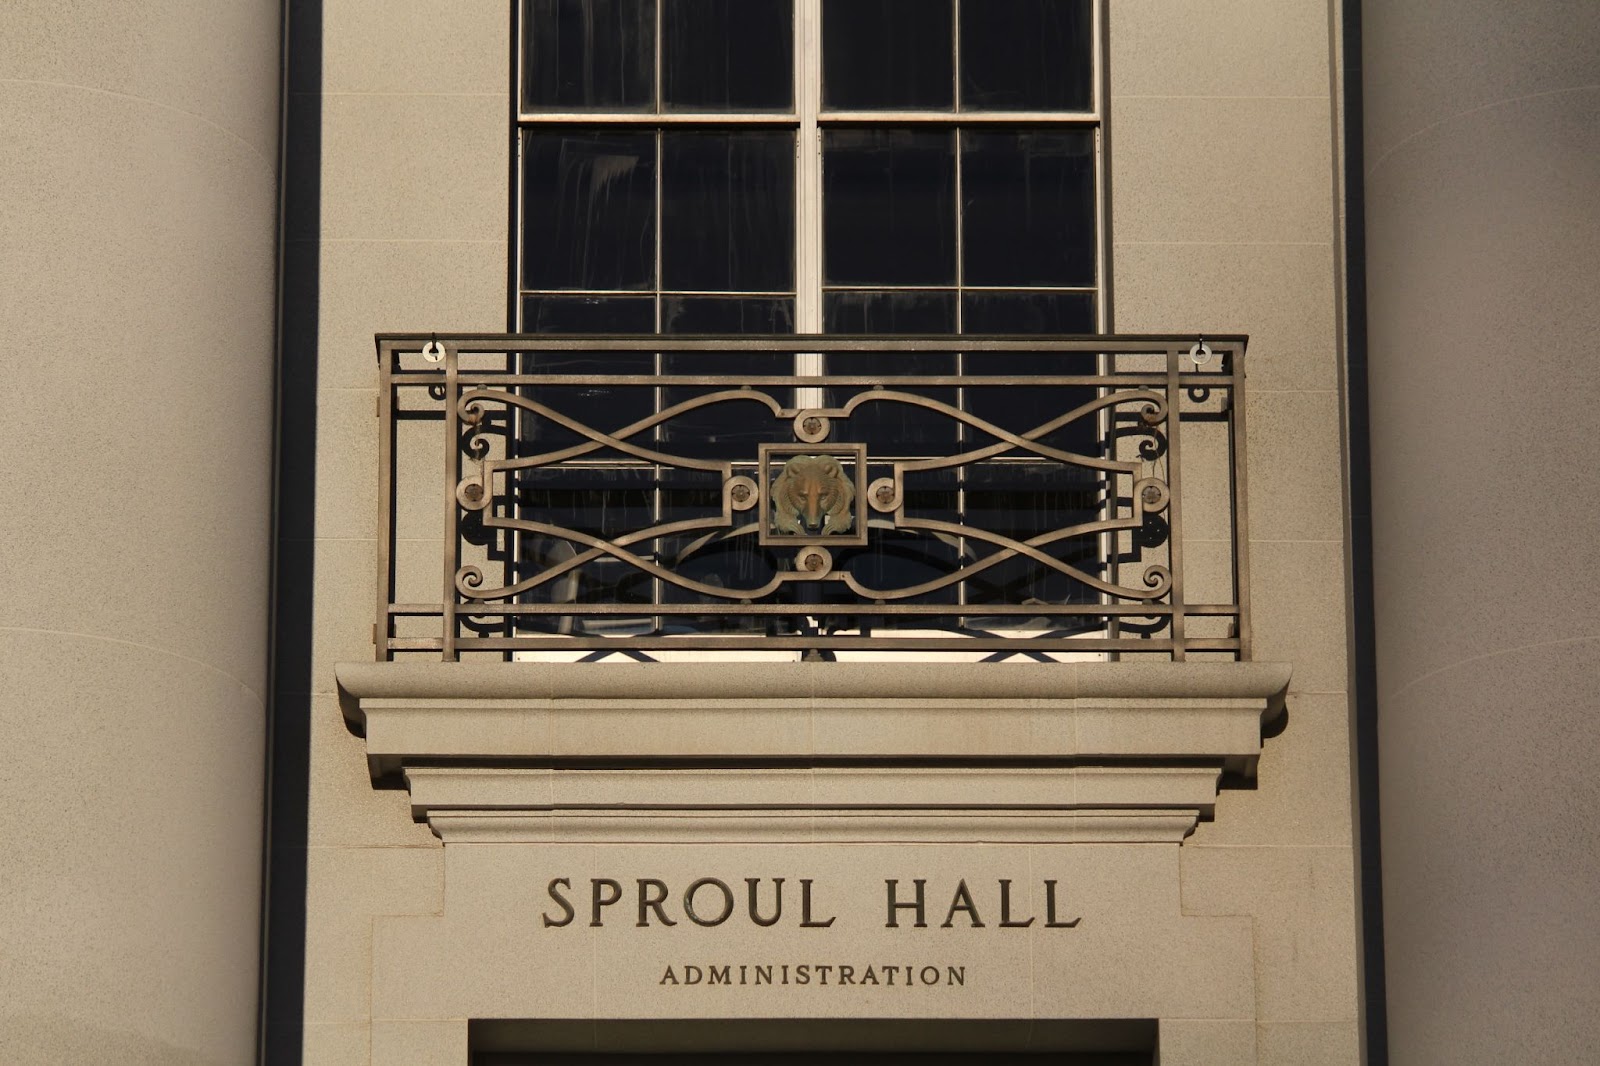 A balcony above Sproul Hall, with an ornate railing, which has a bear motif in the center. 